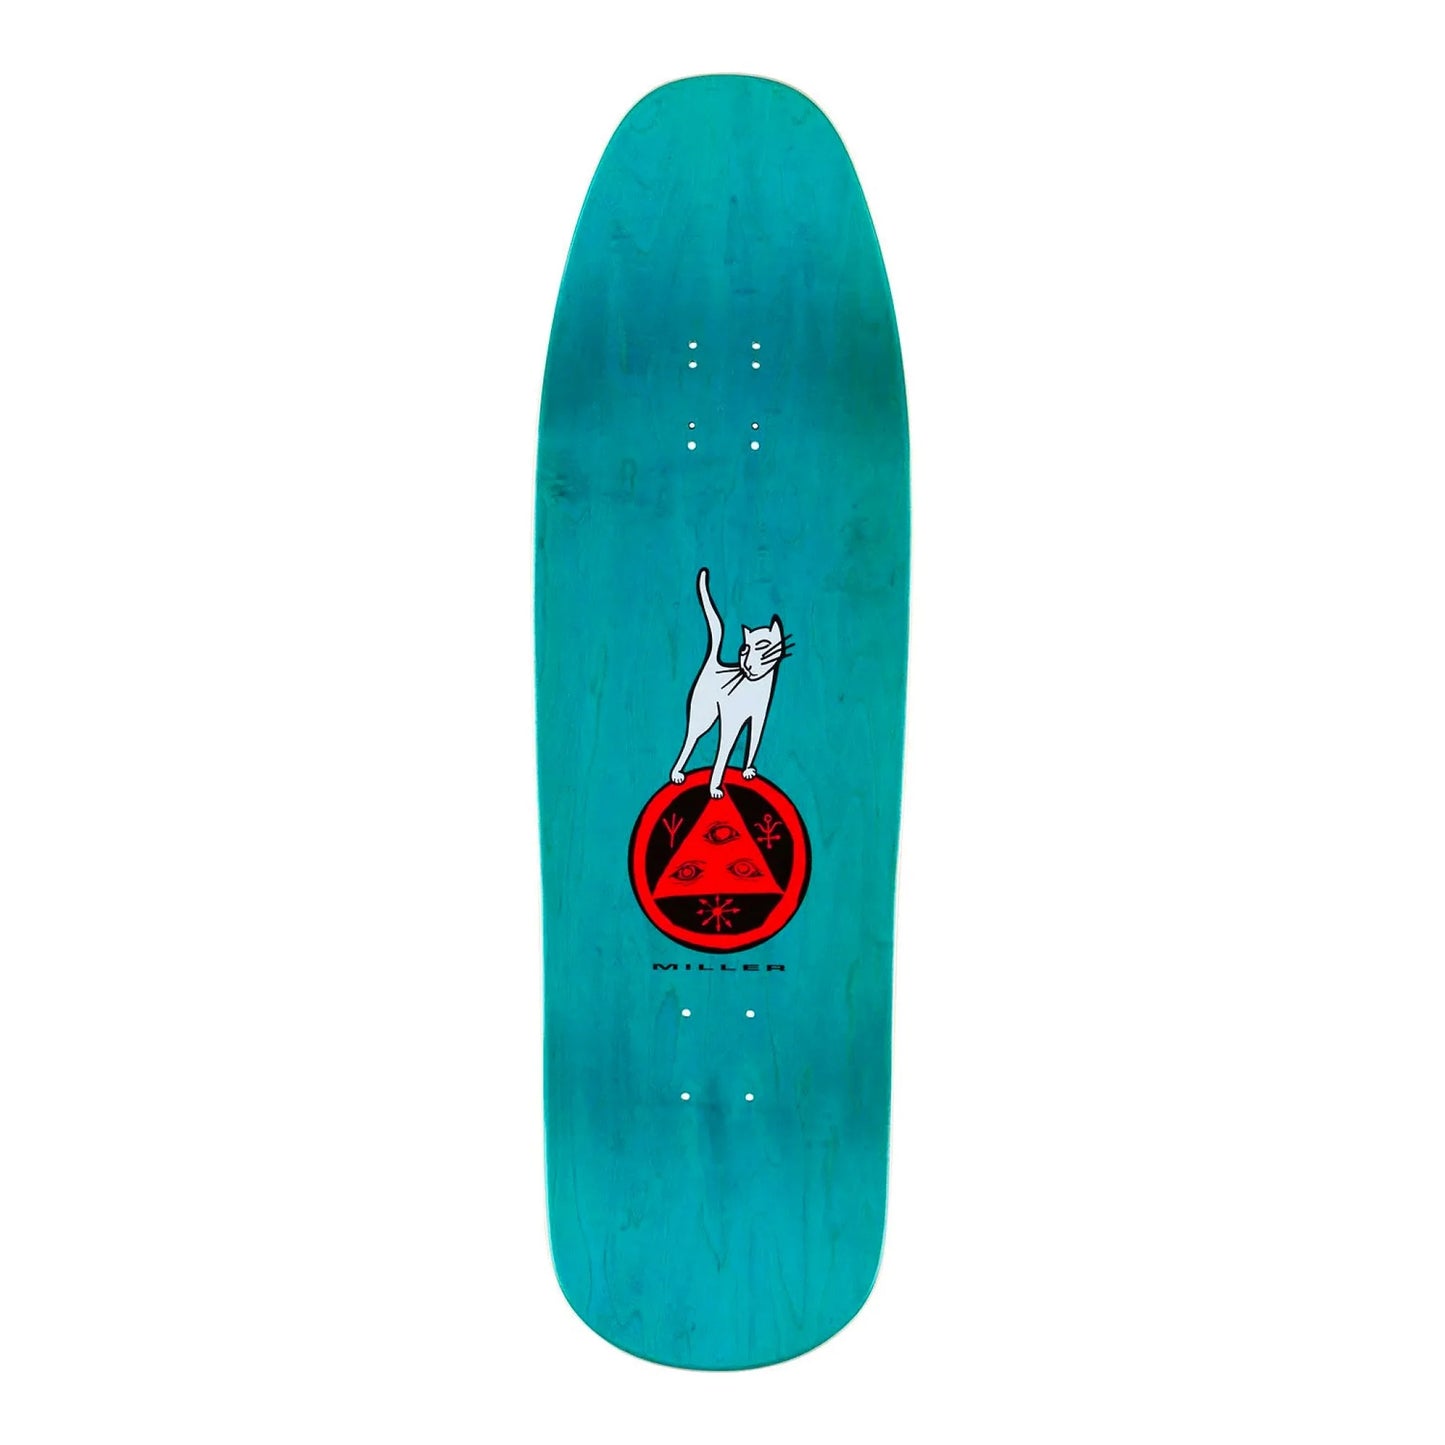 Welcome Miller Lizard on Gaia Teal - 9.6" - Prime Delux Store